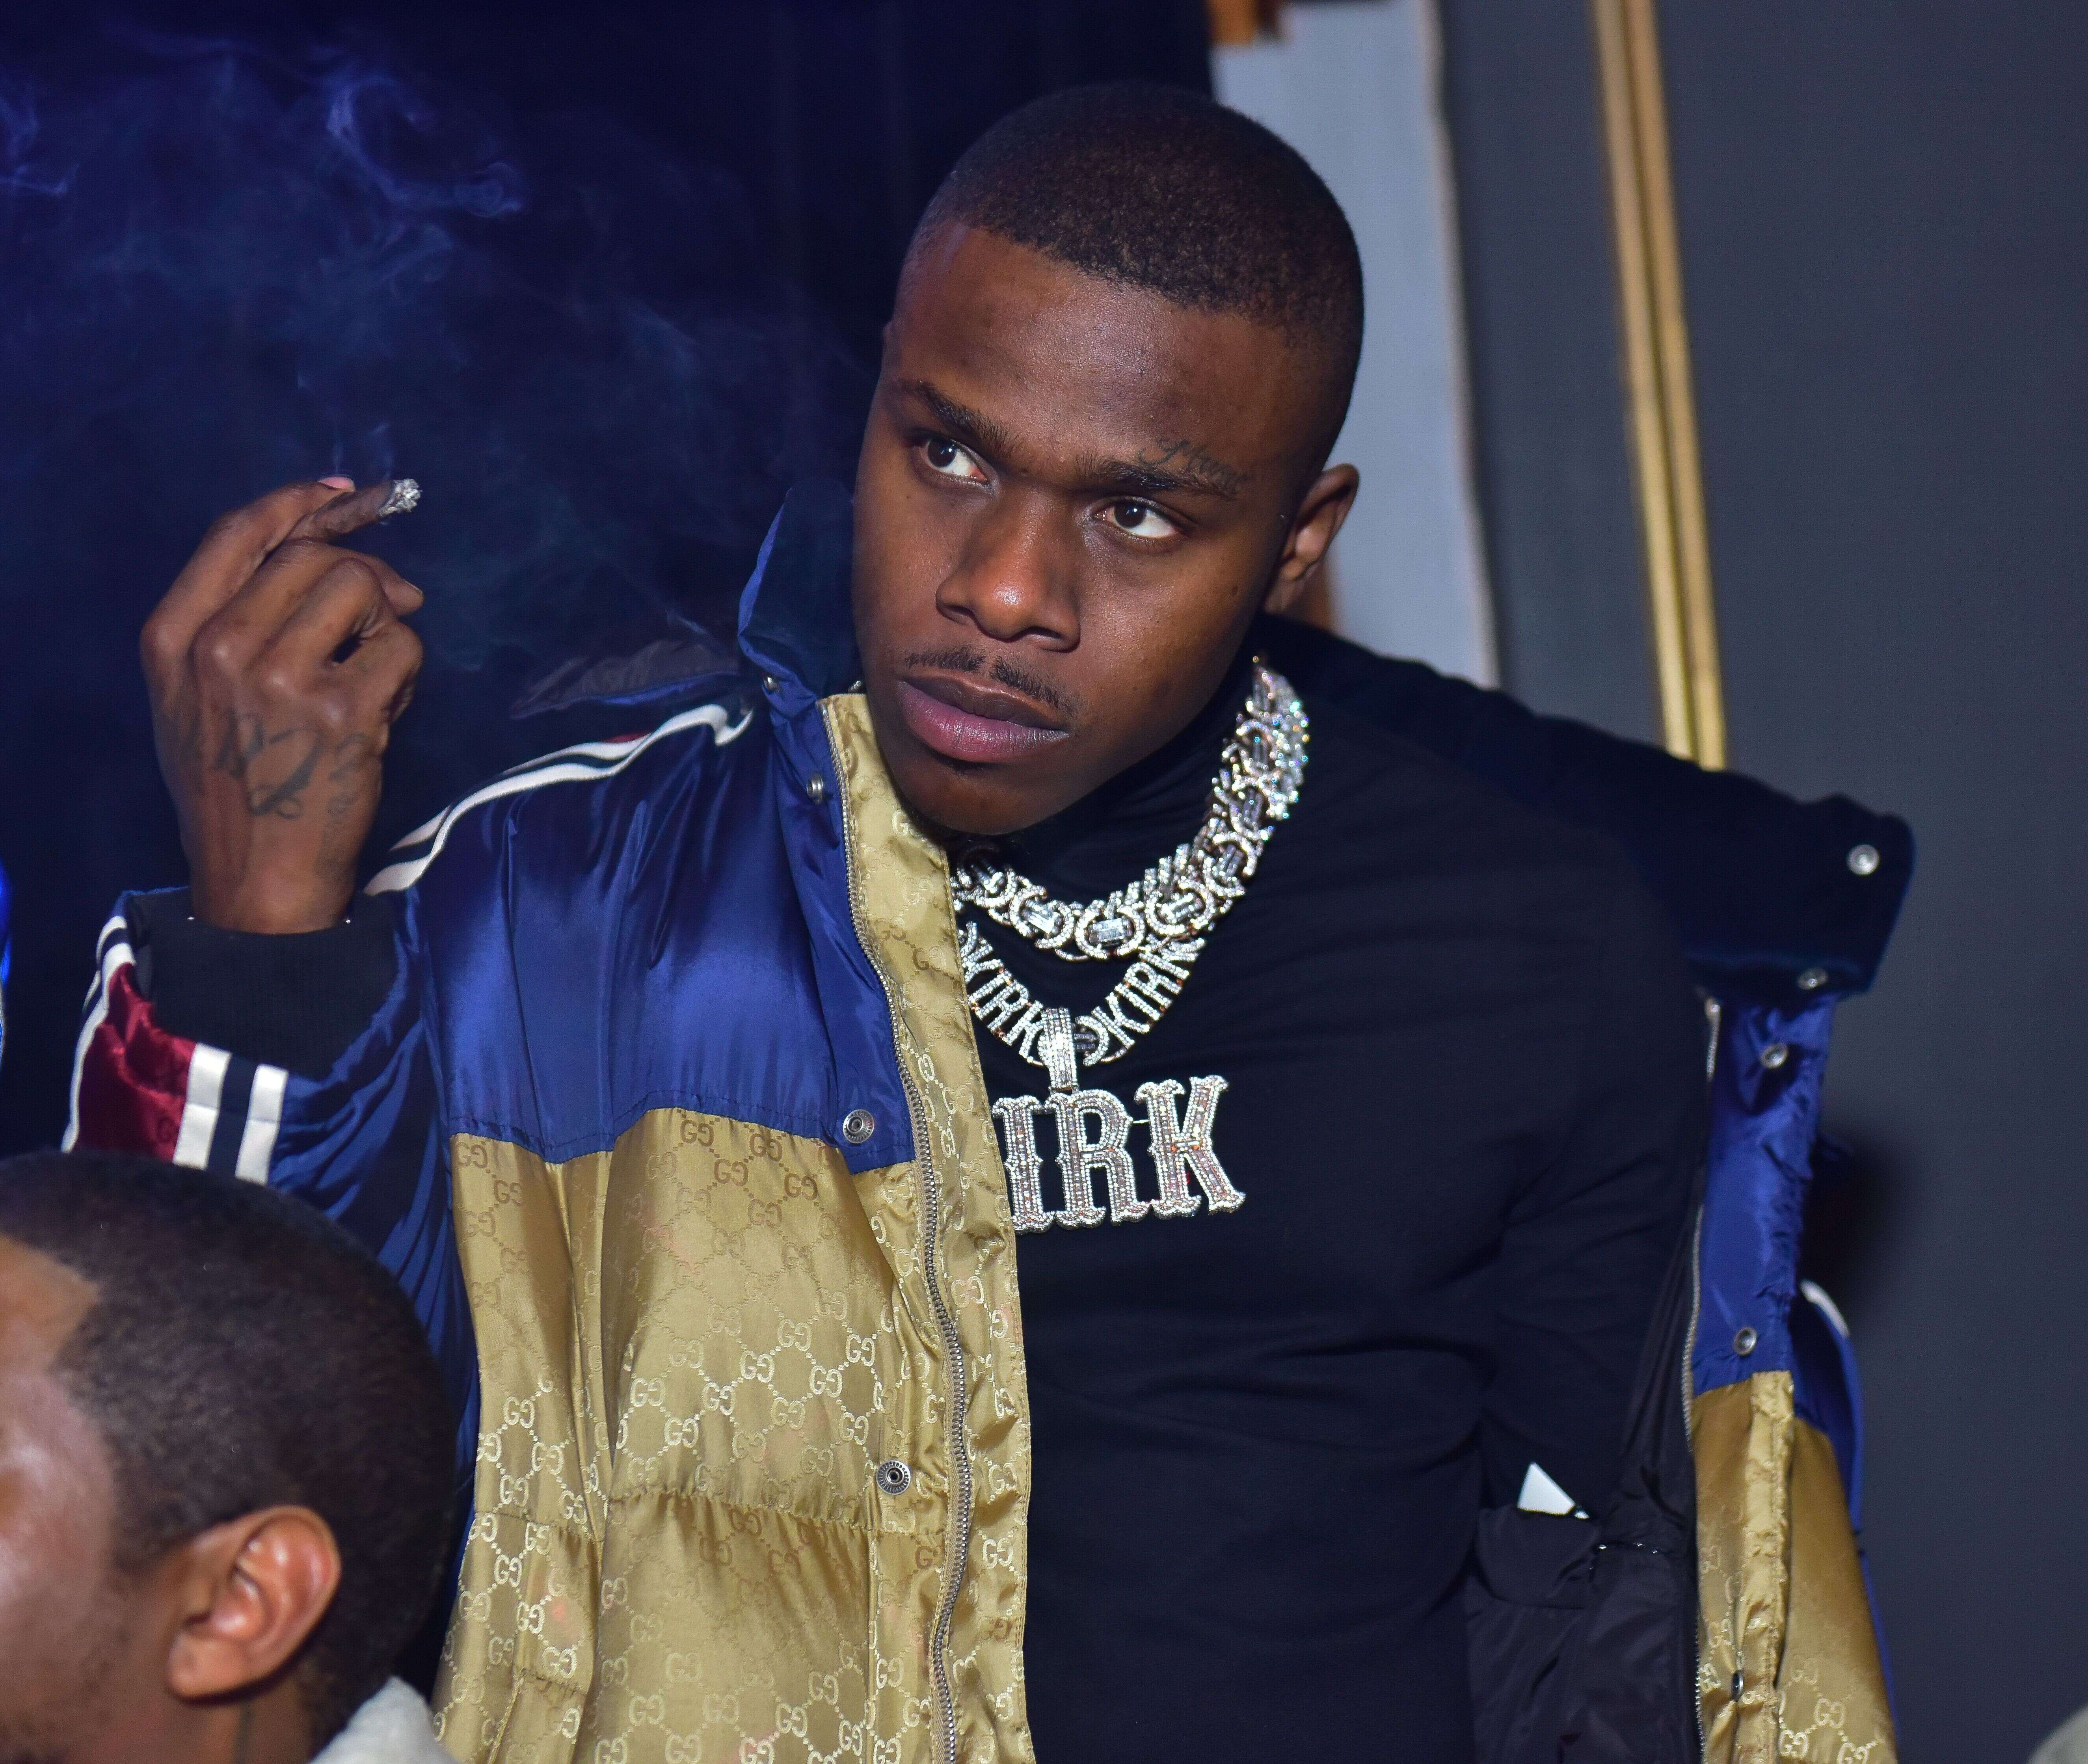 ATLANTA, GA - DECEMBER 02: Rapper DaBaby attends DaBaby Official Kirk Tour After Party at Oak on December 2, 2019 in Atlanta, Georgia.(photo by Prince Williams/Wireimage)